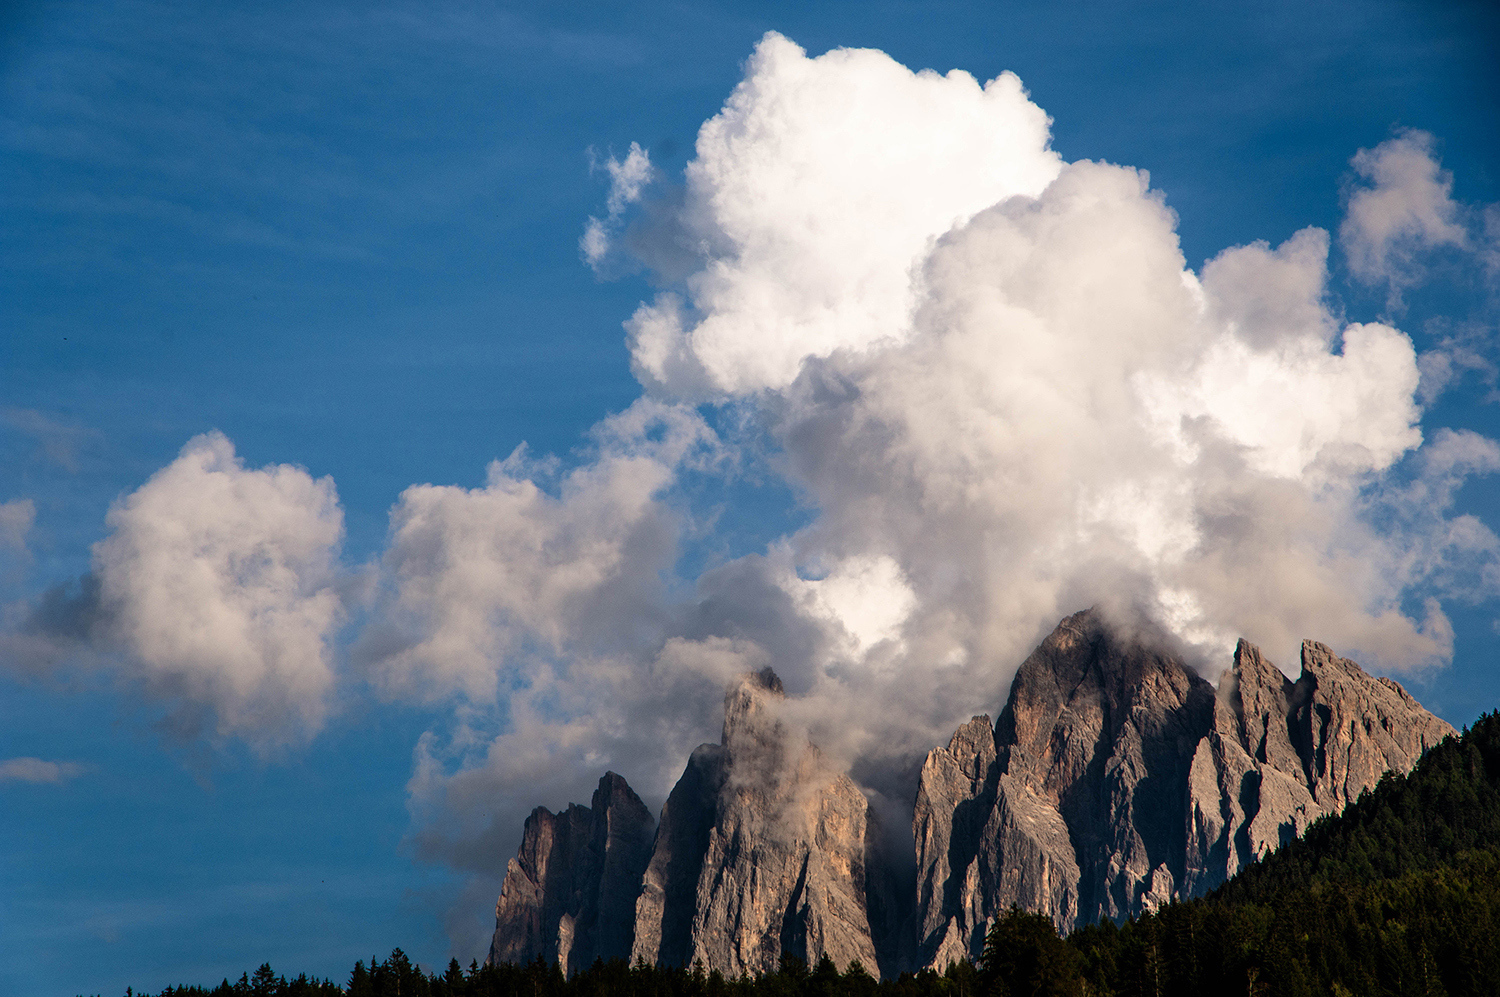 <p>In the local Ladin language, these peaks are called Odle (needles), which does describe their steep, sharp peaks – here partly obscured by clustering clouds.</p>